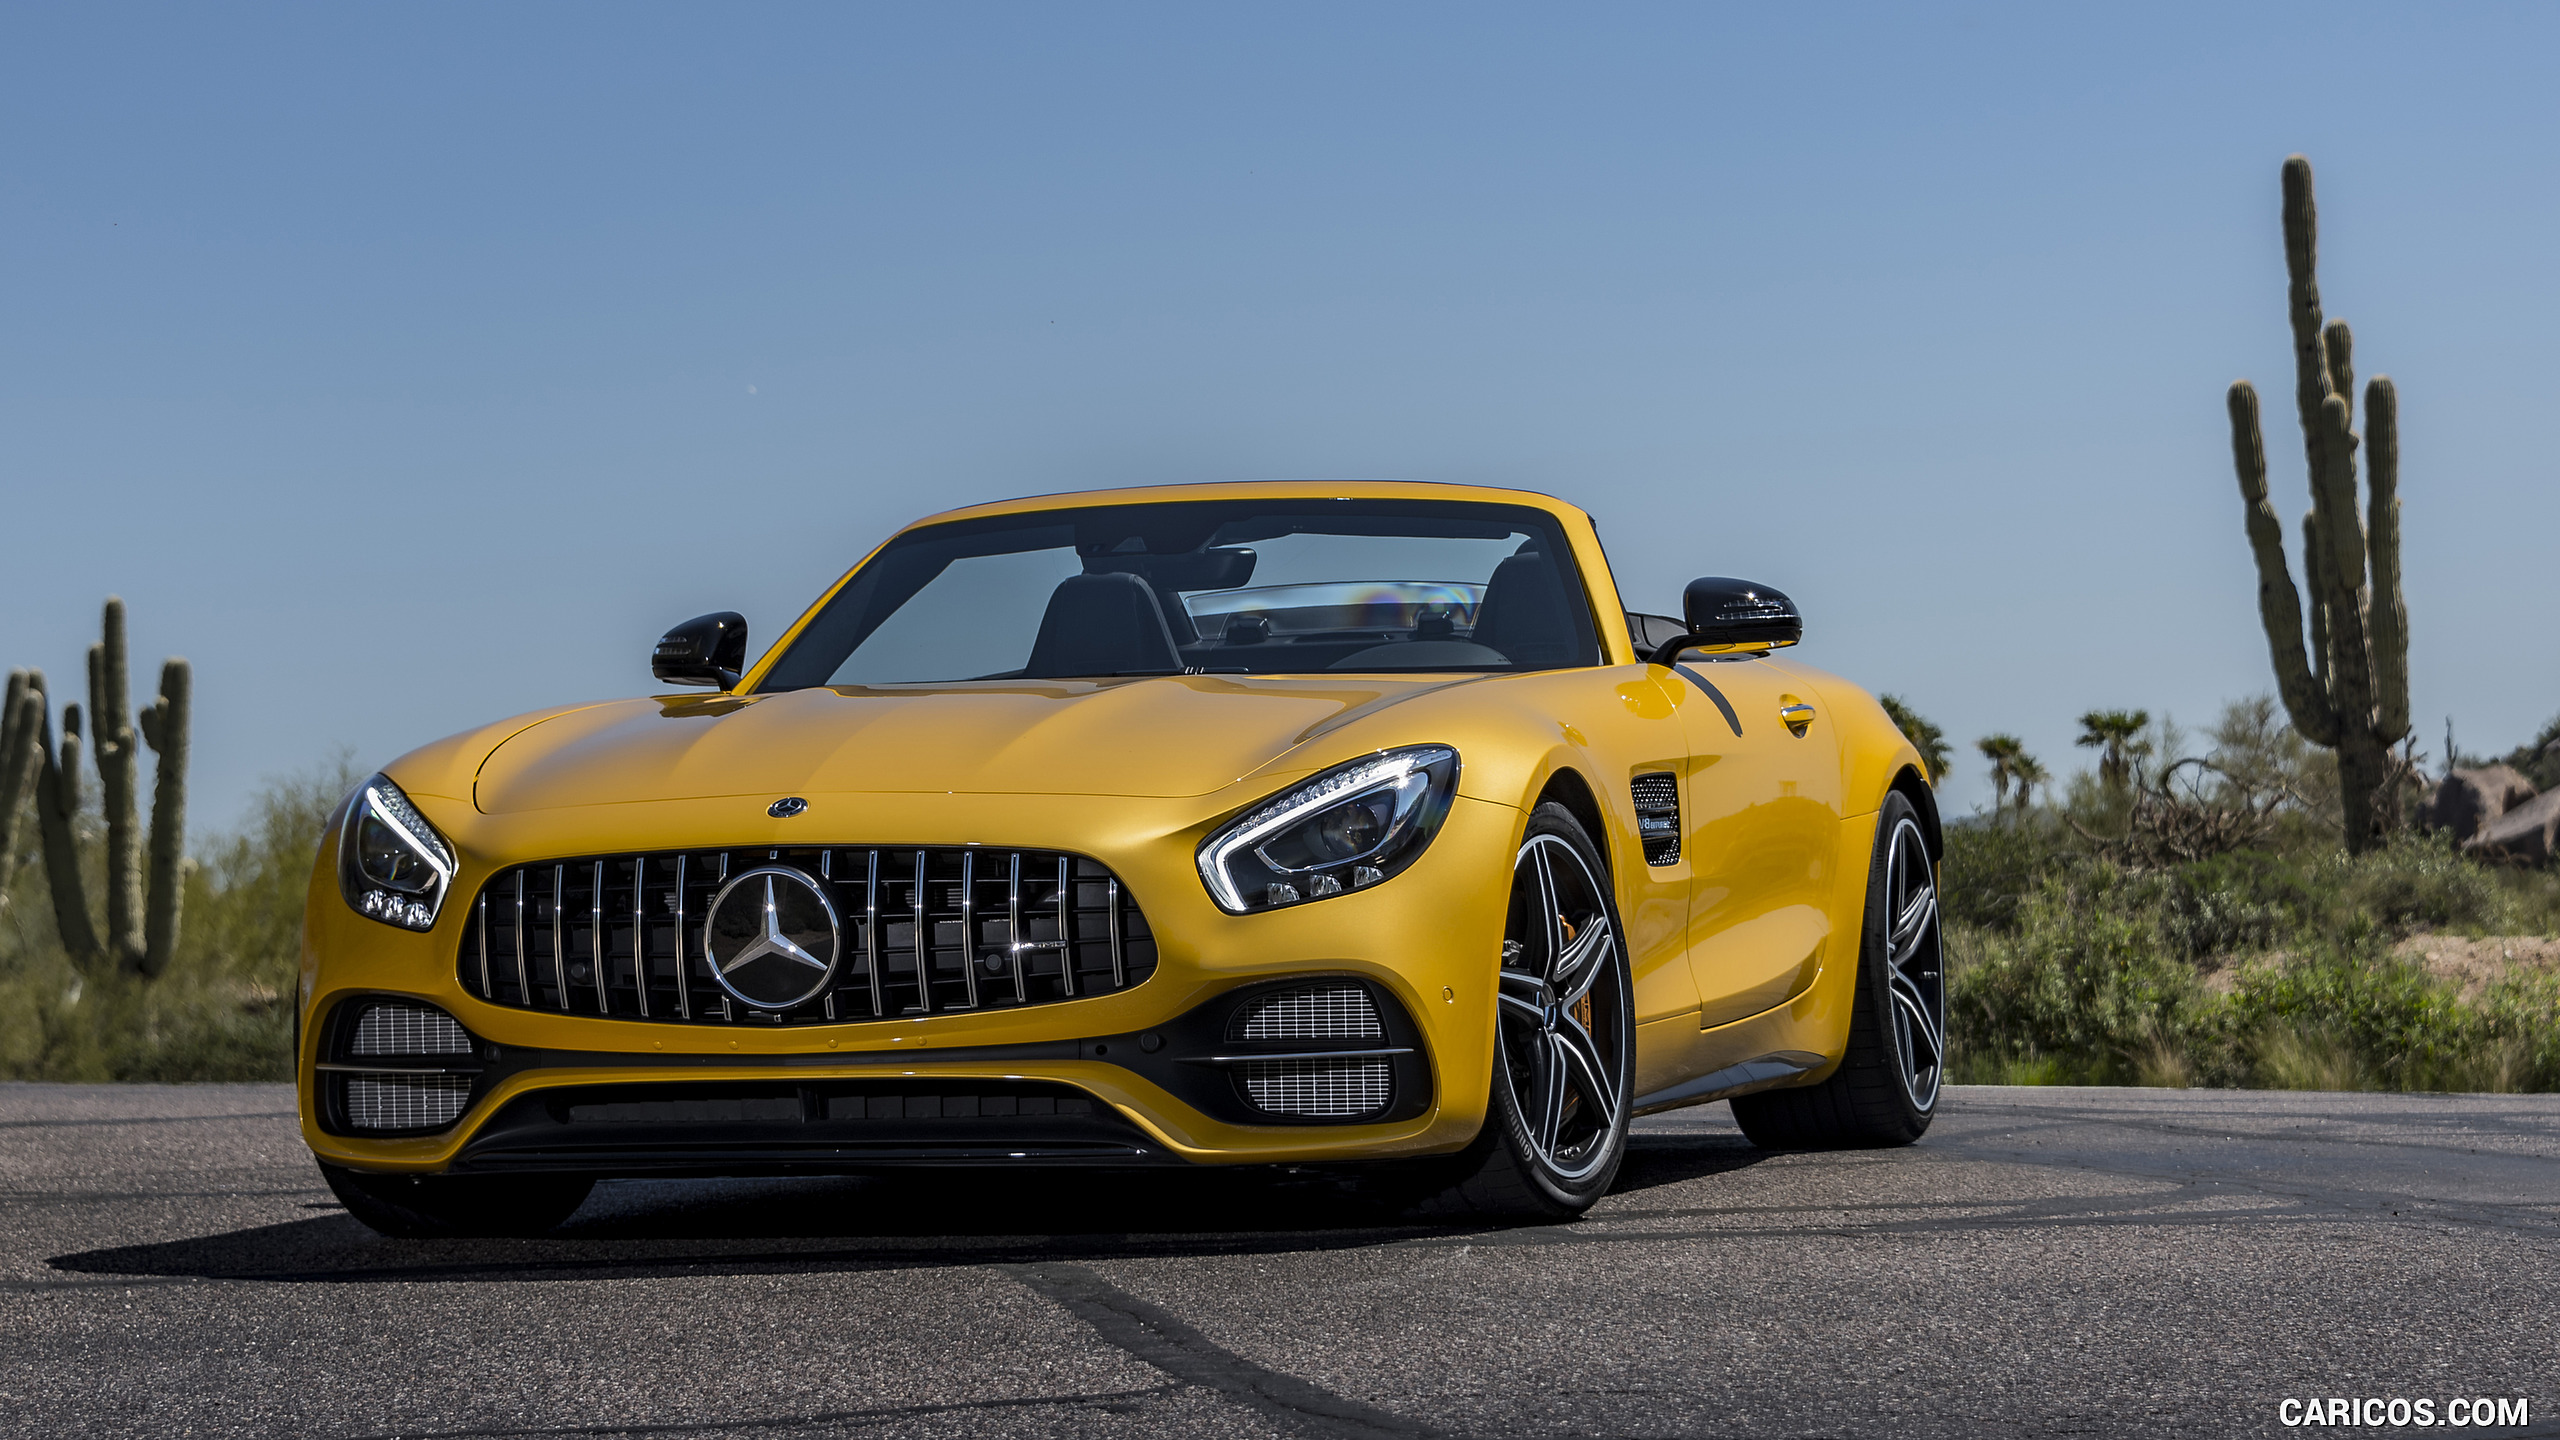 2018 Mercedes-AMG GT C Roadster - Front Three-Quarter, #236 of 350